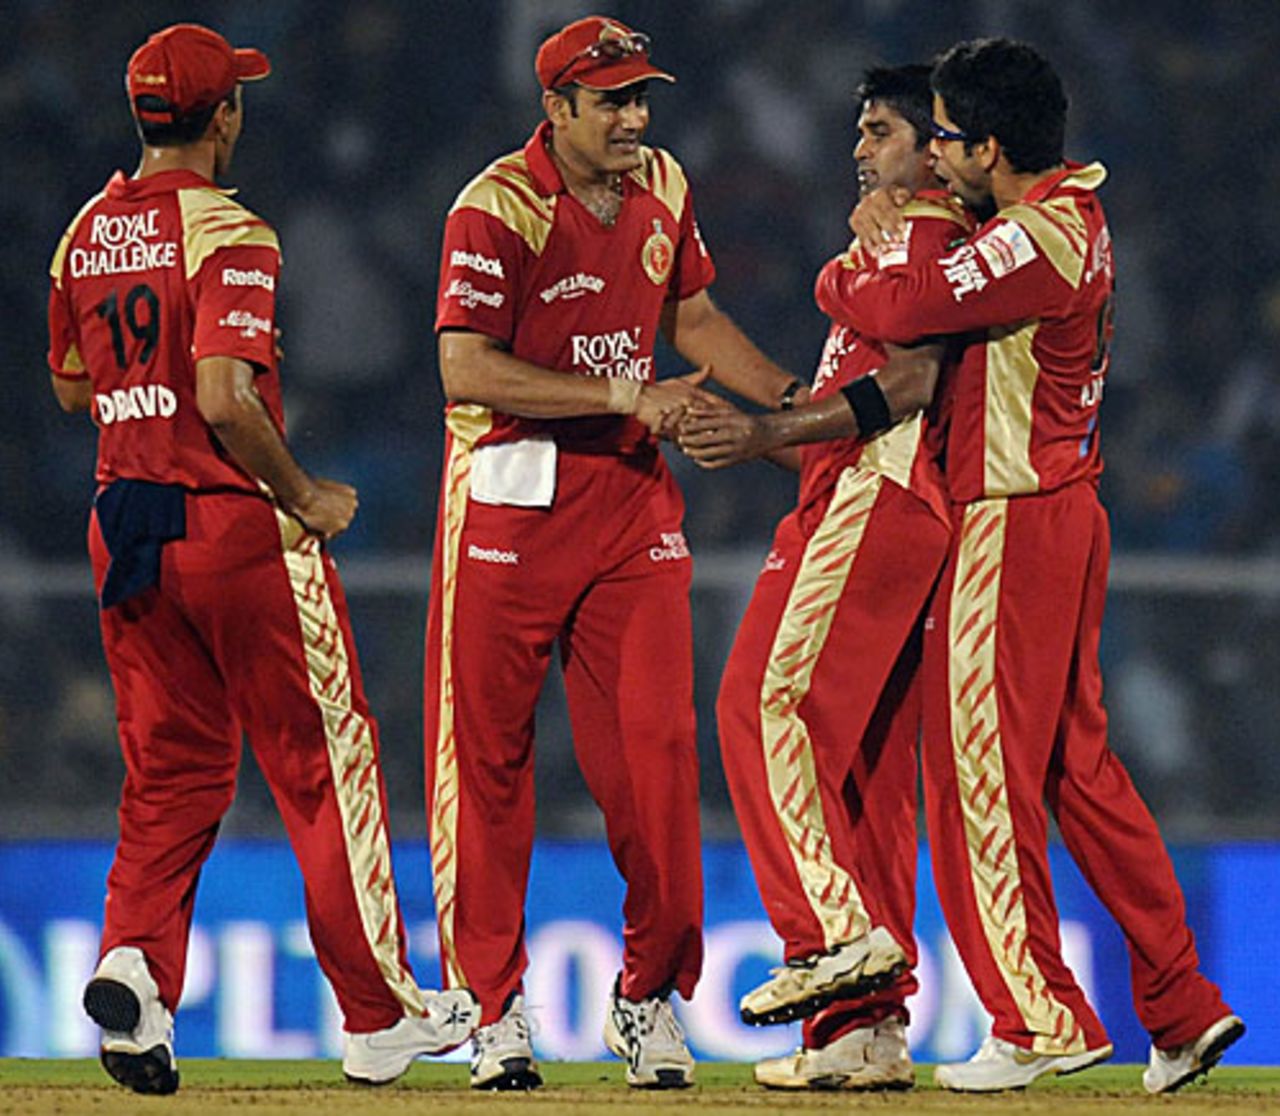 Vinay Kumar is the center of attention after taking three wickets in an over, Mumbai Indians v Royal Challengers Bangalore, IPL, Mumbai, March 20, 2010